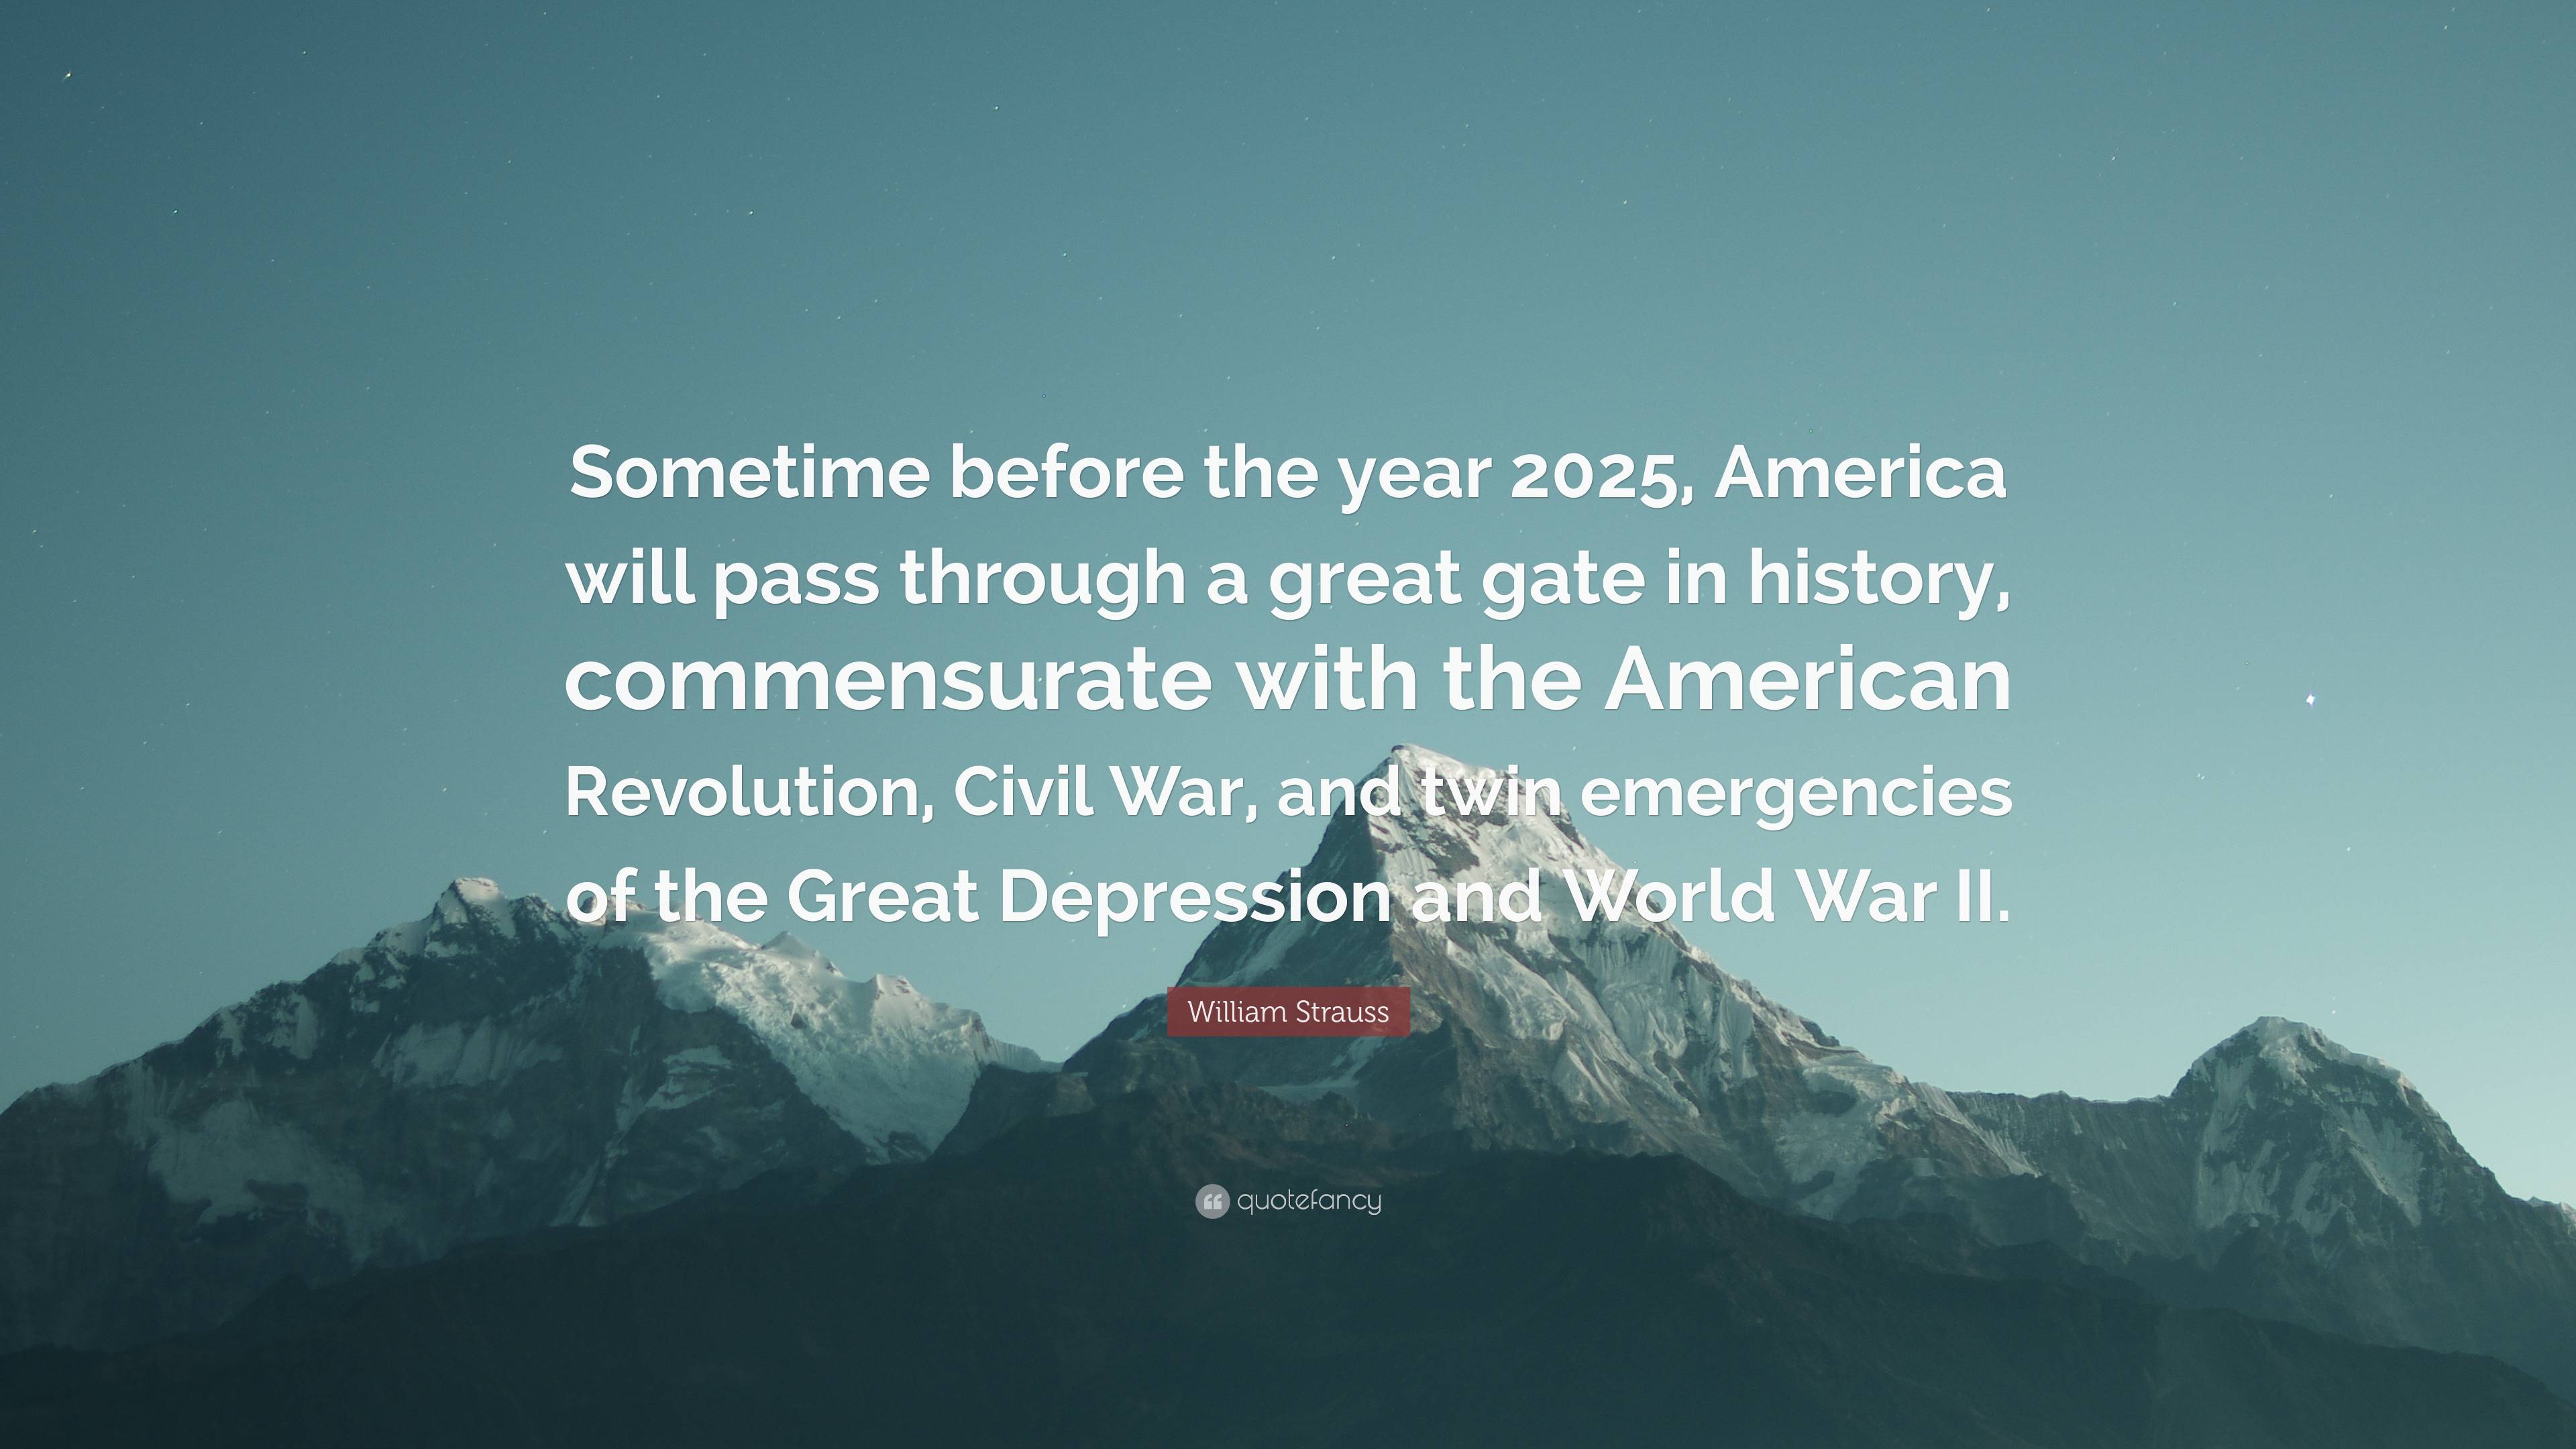 William Strauss Quote “Sometime before the year 2025, America will